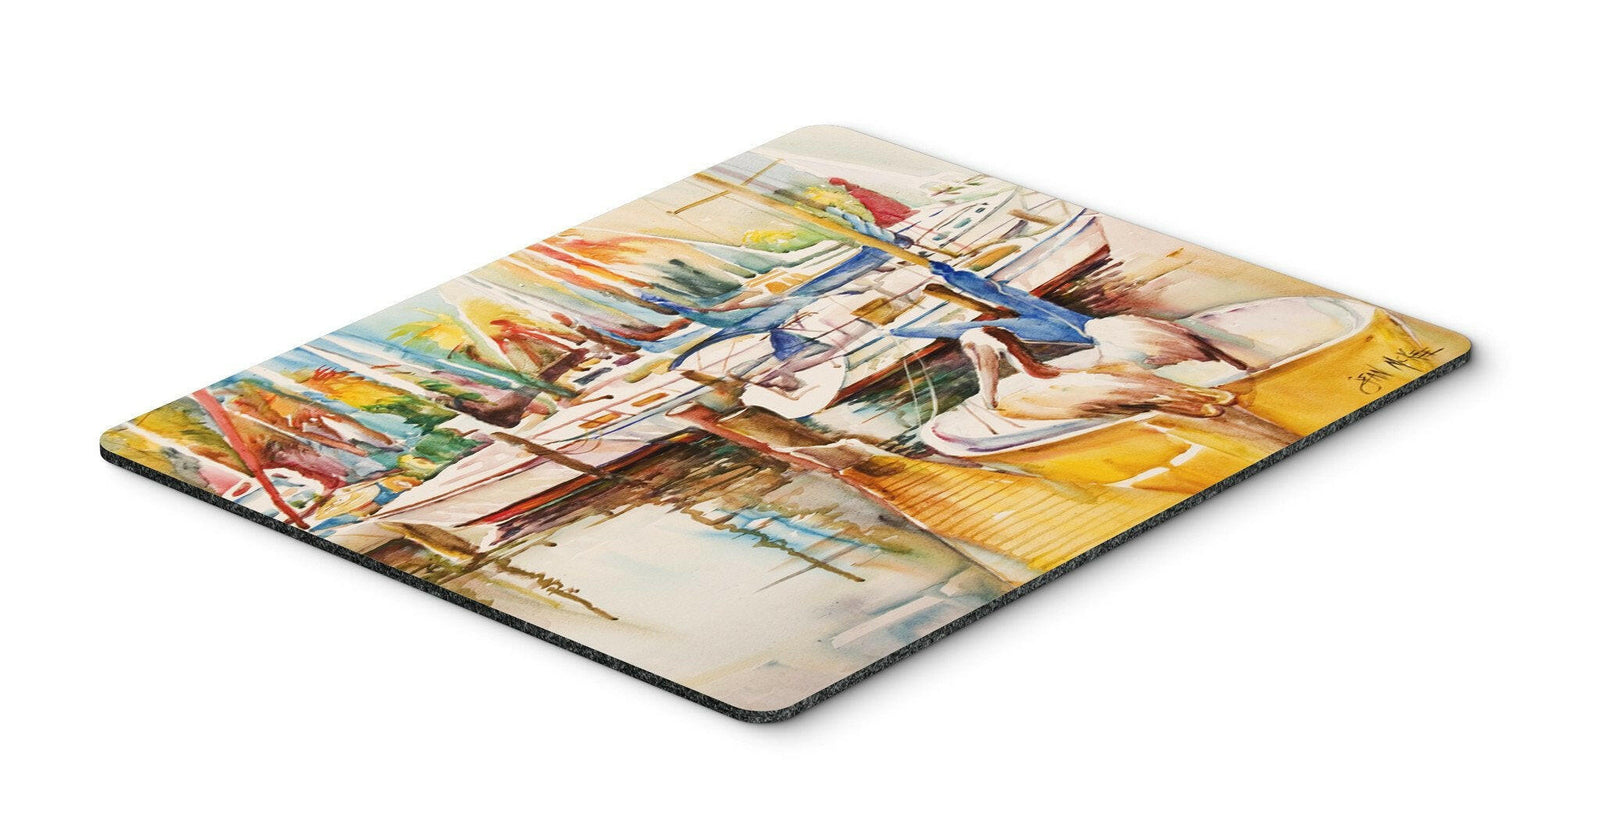 Sailboat  with Pelican Golden Days Mouse Pad, Hot Pad or Trivet JMK1042MP by Caroline's Treasures